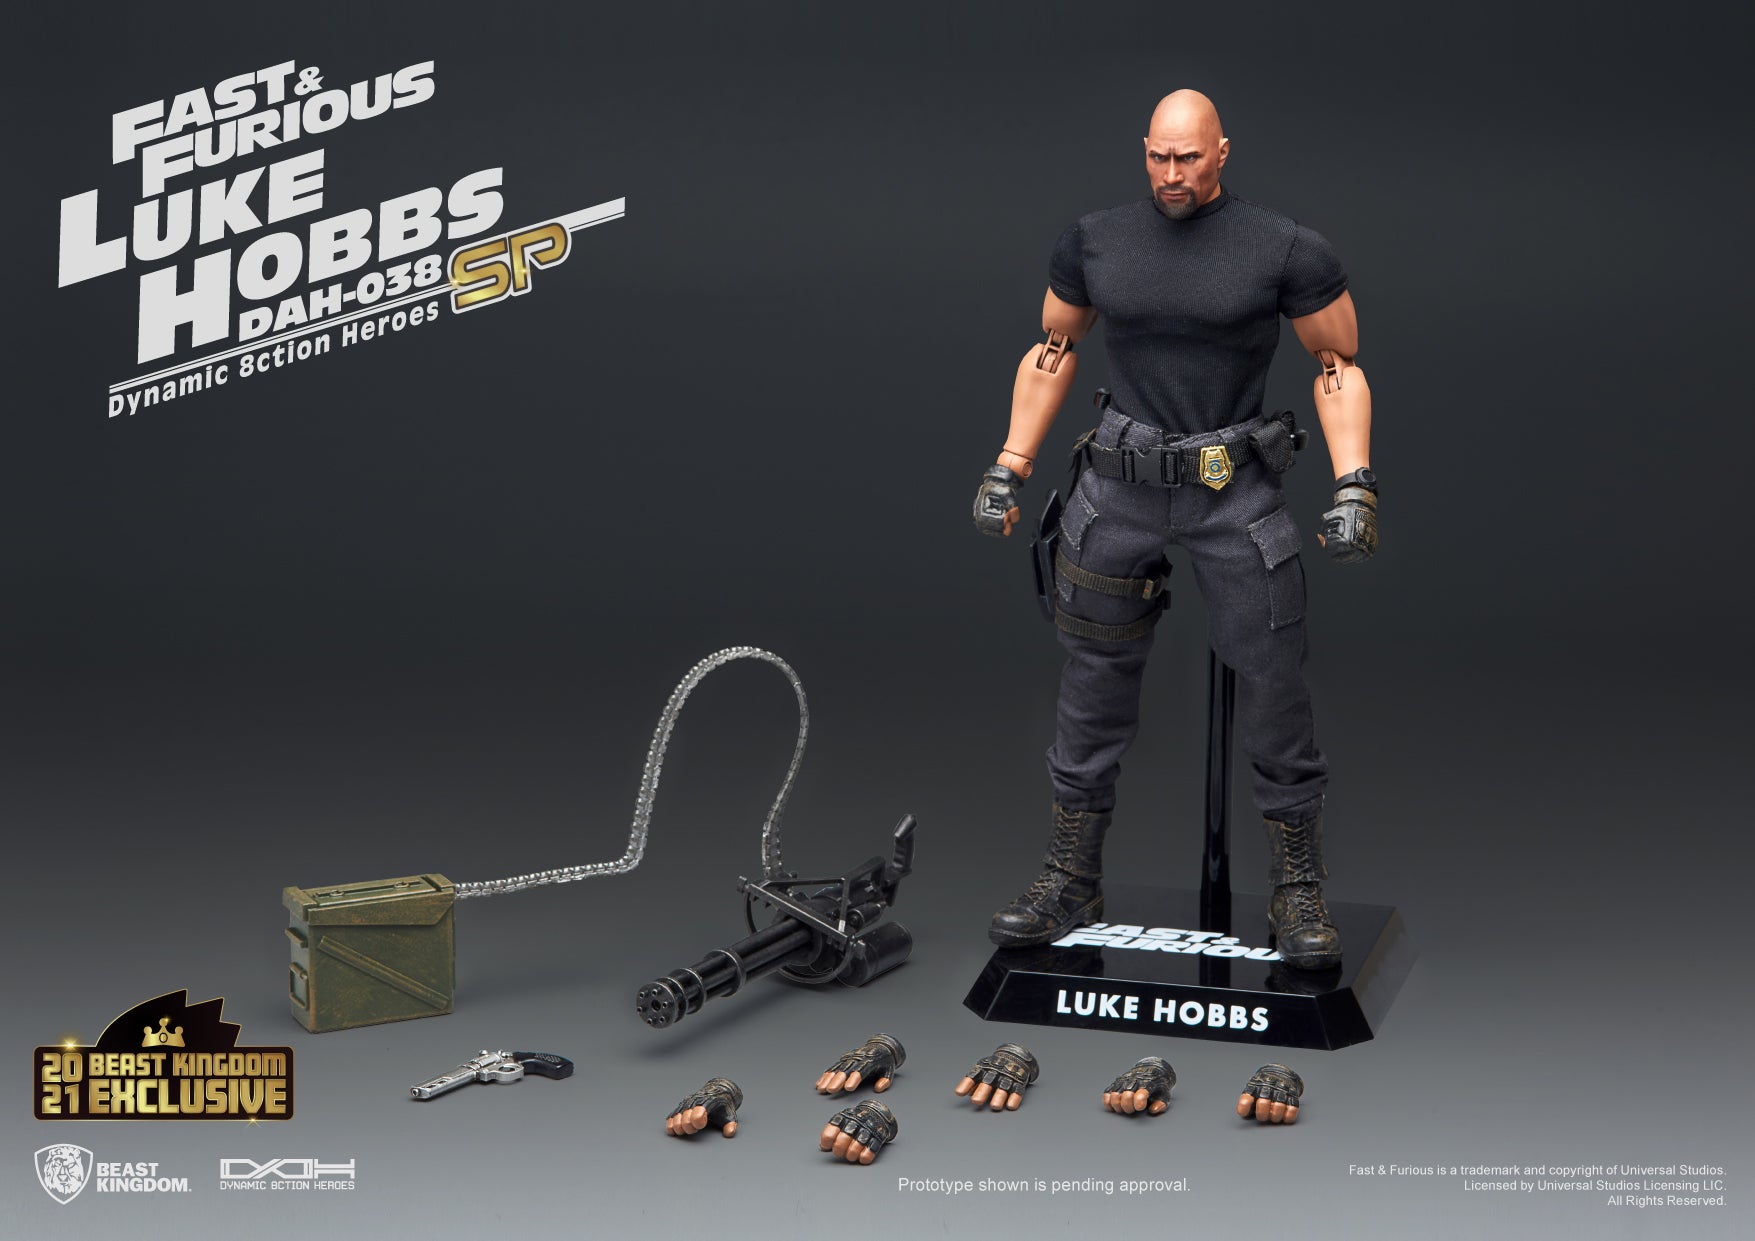 Beast Kingdom DAH-038SP The Fast and the Furious: Luke Hobbs (Limited Edition) Dynamic 8ction Heroes Action Figure